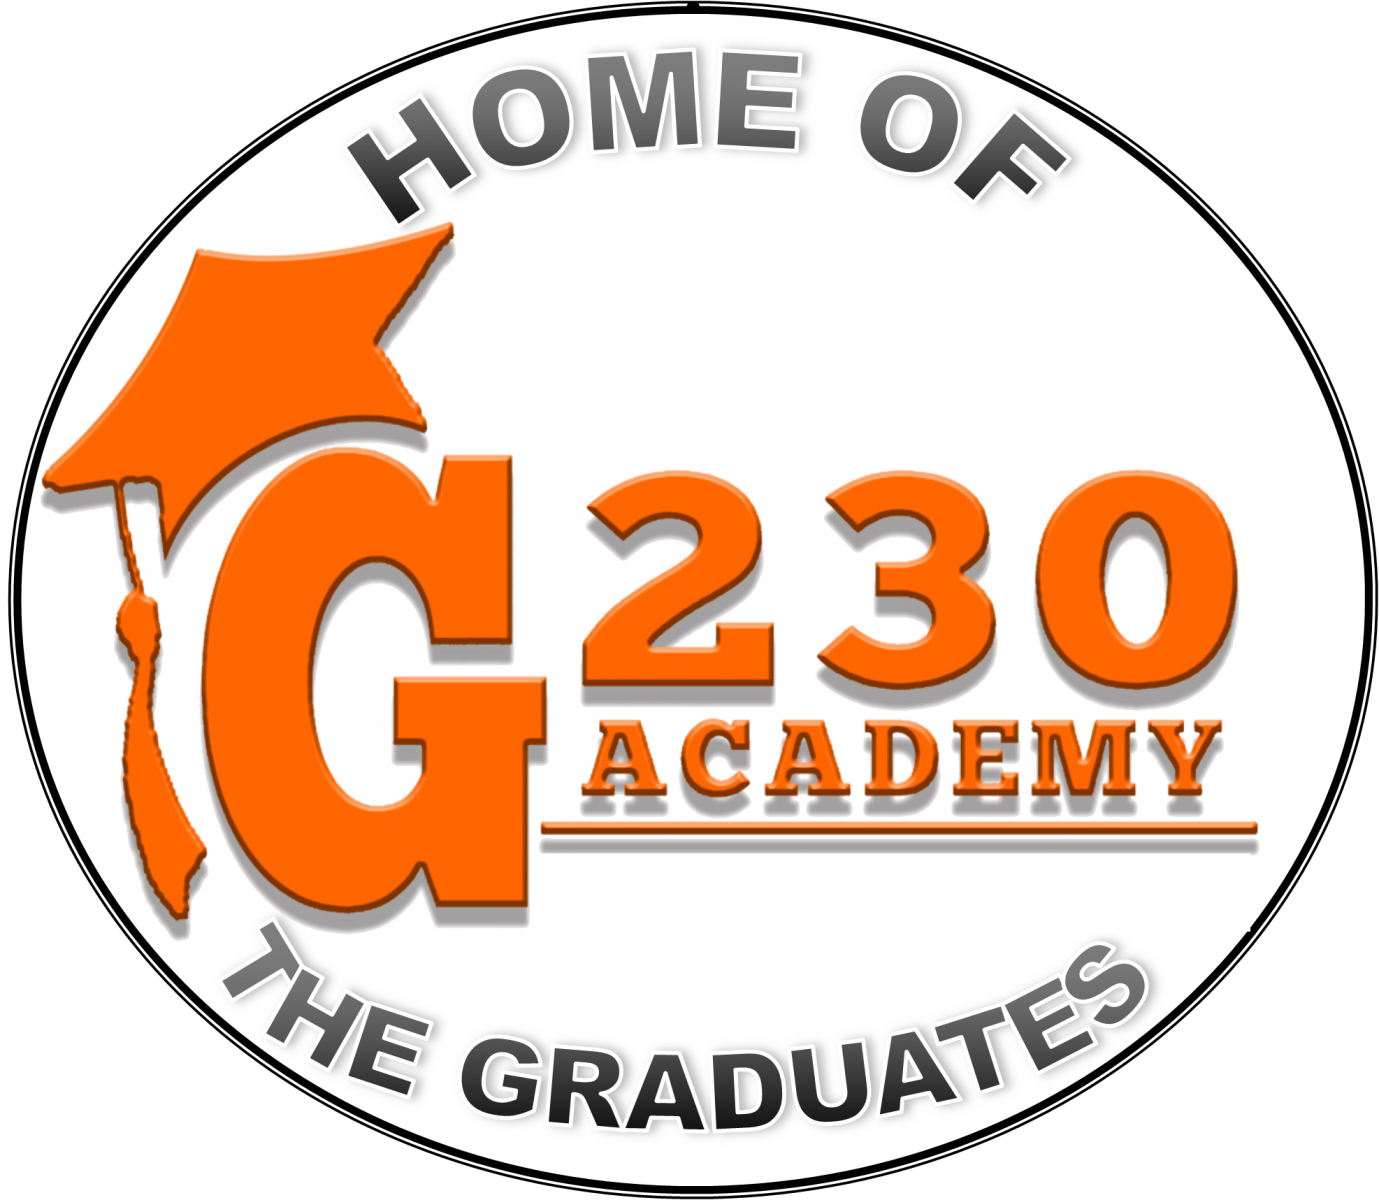 G230 Orange Text and Black Border and sub text Home of the Graduates Logo